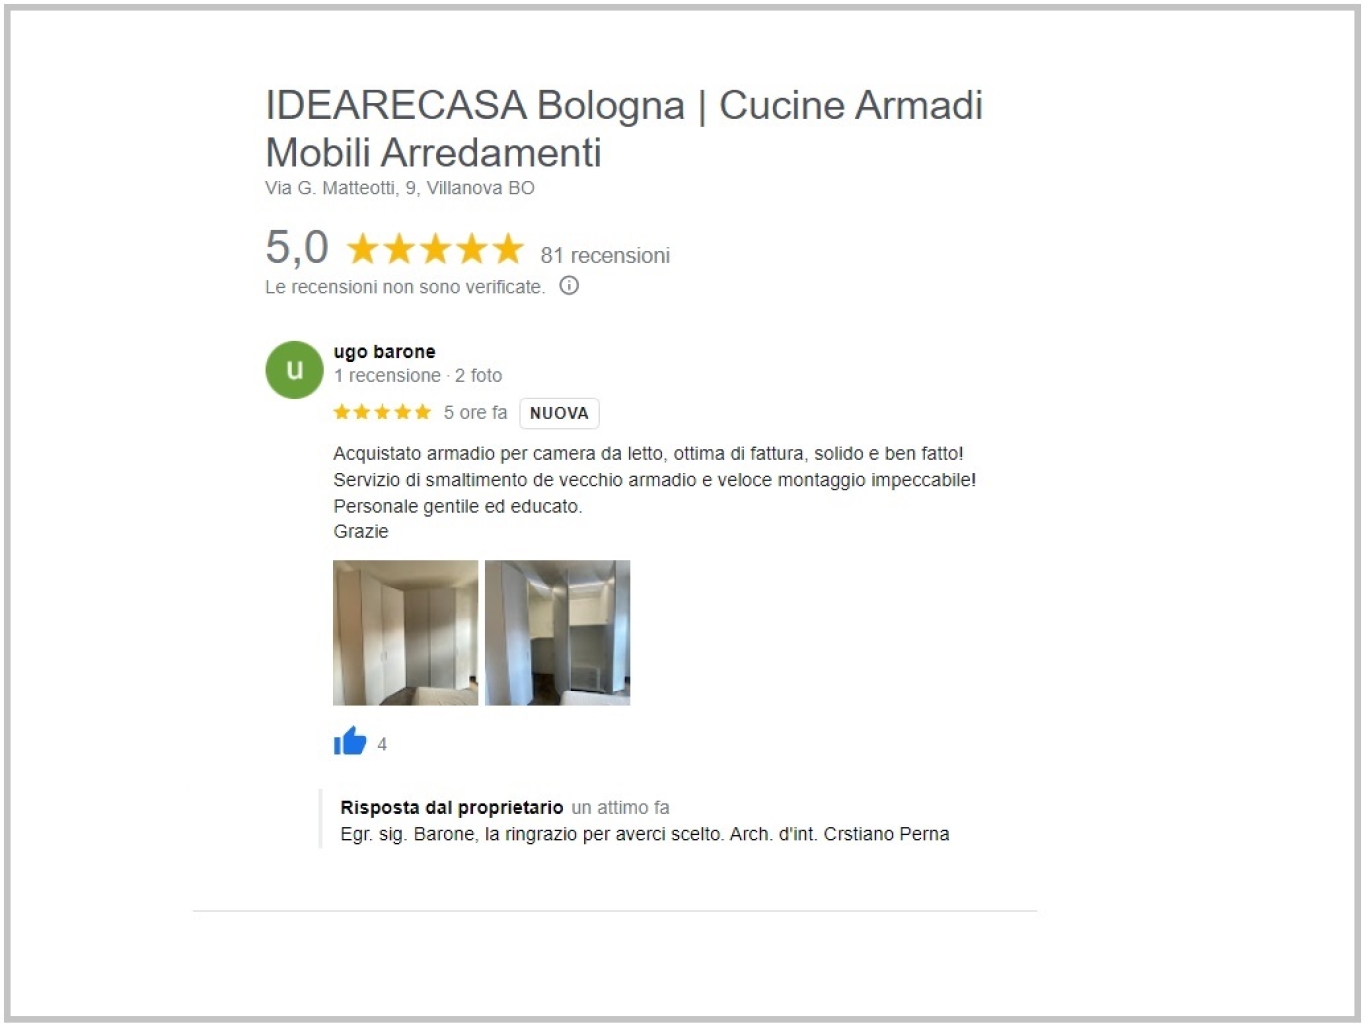 Review by Mr. Barone of Bologna